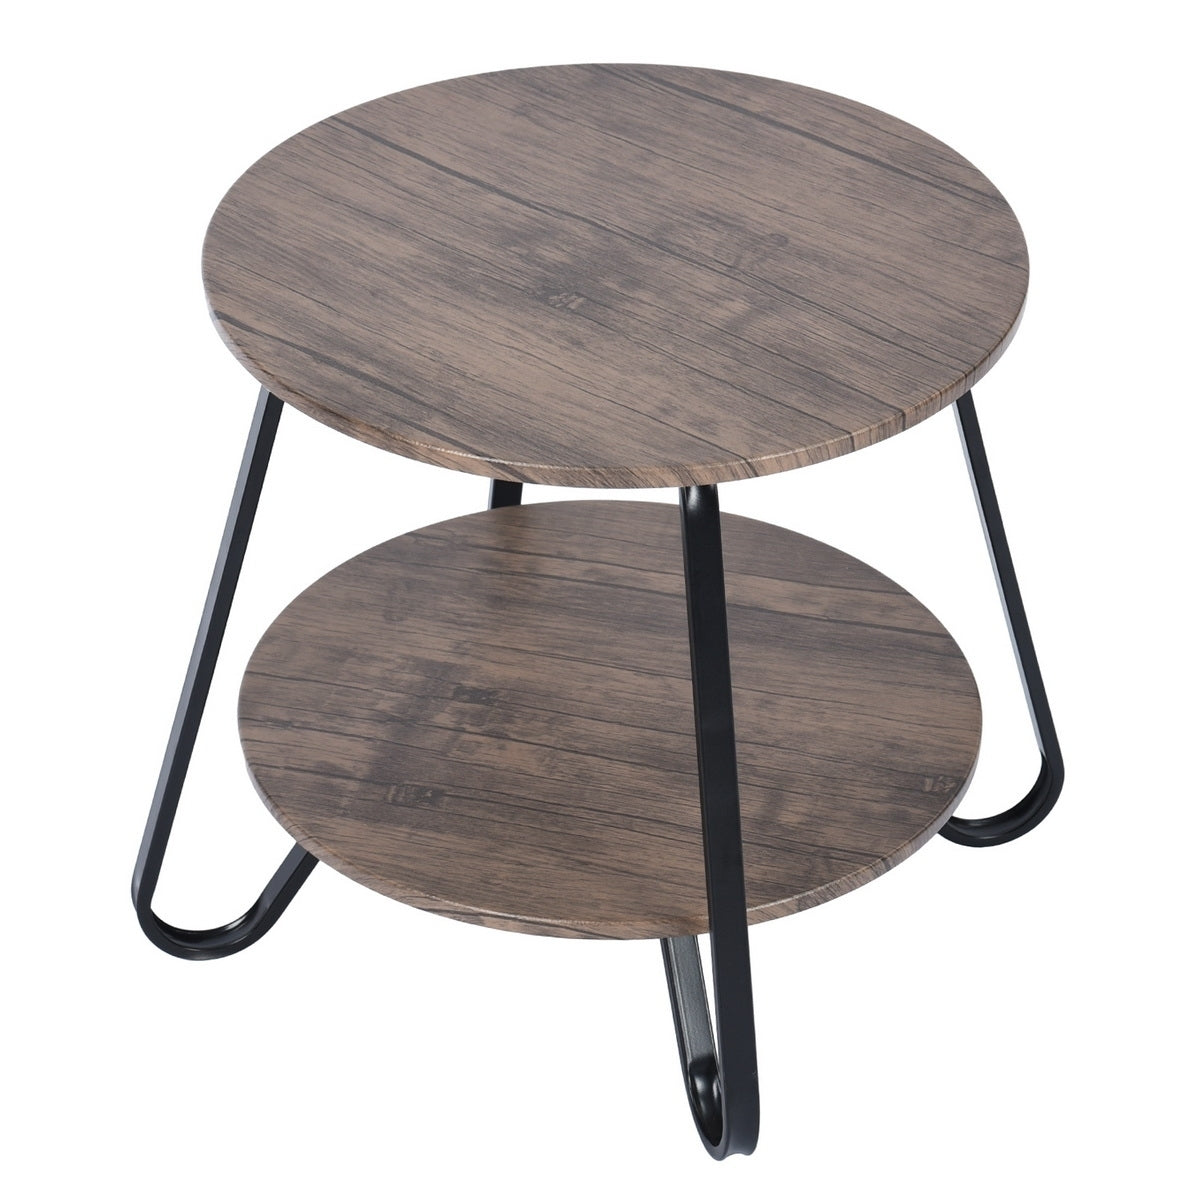 18.1 Inch Small Round Coffee Table Coffee Table (Brown)